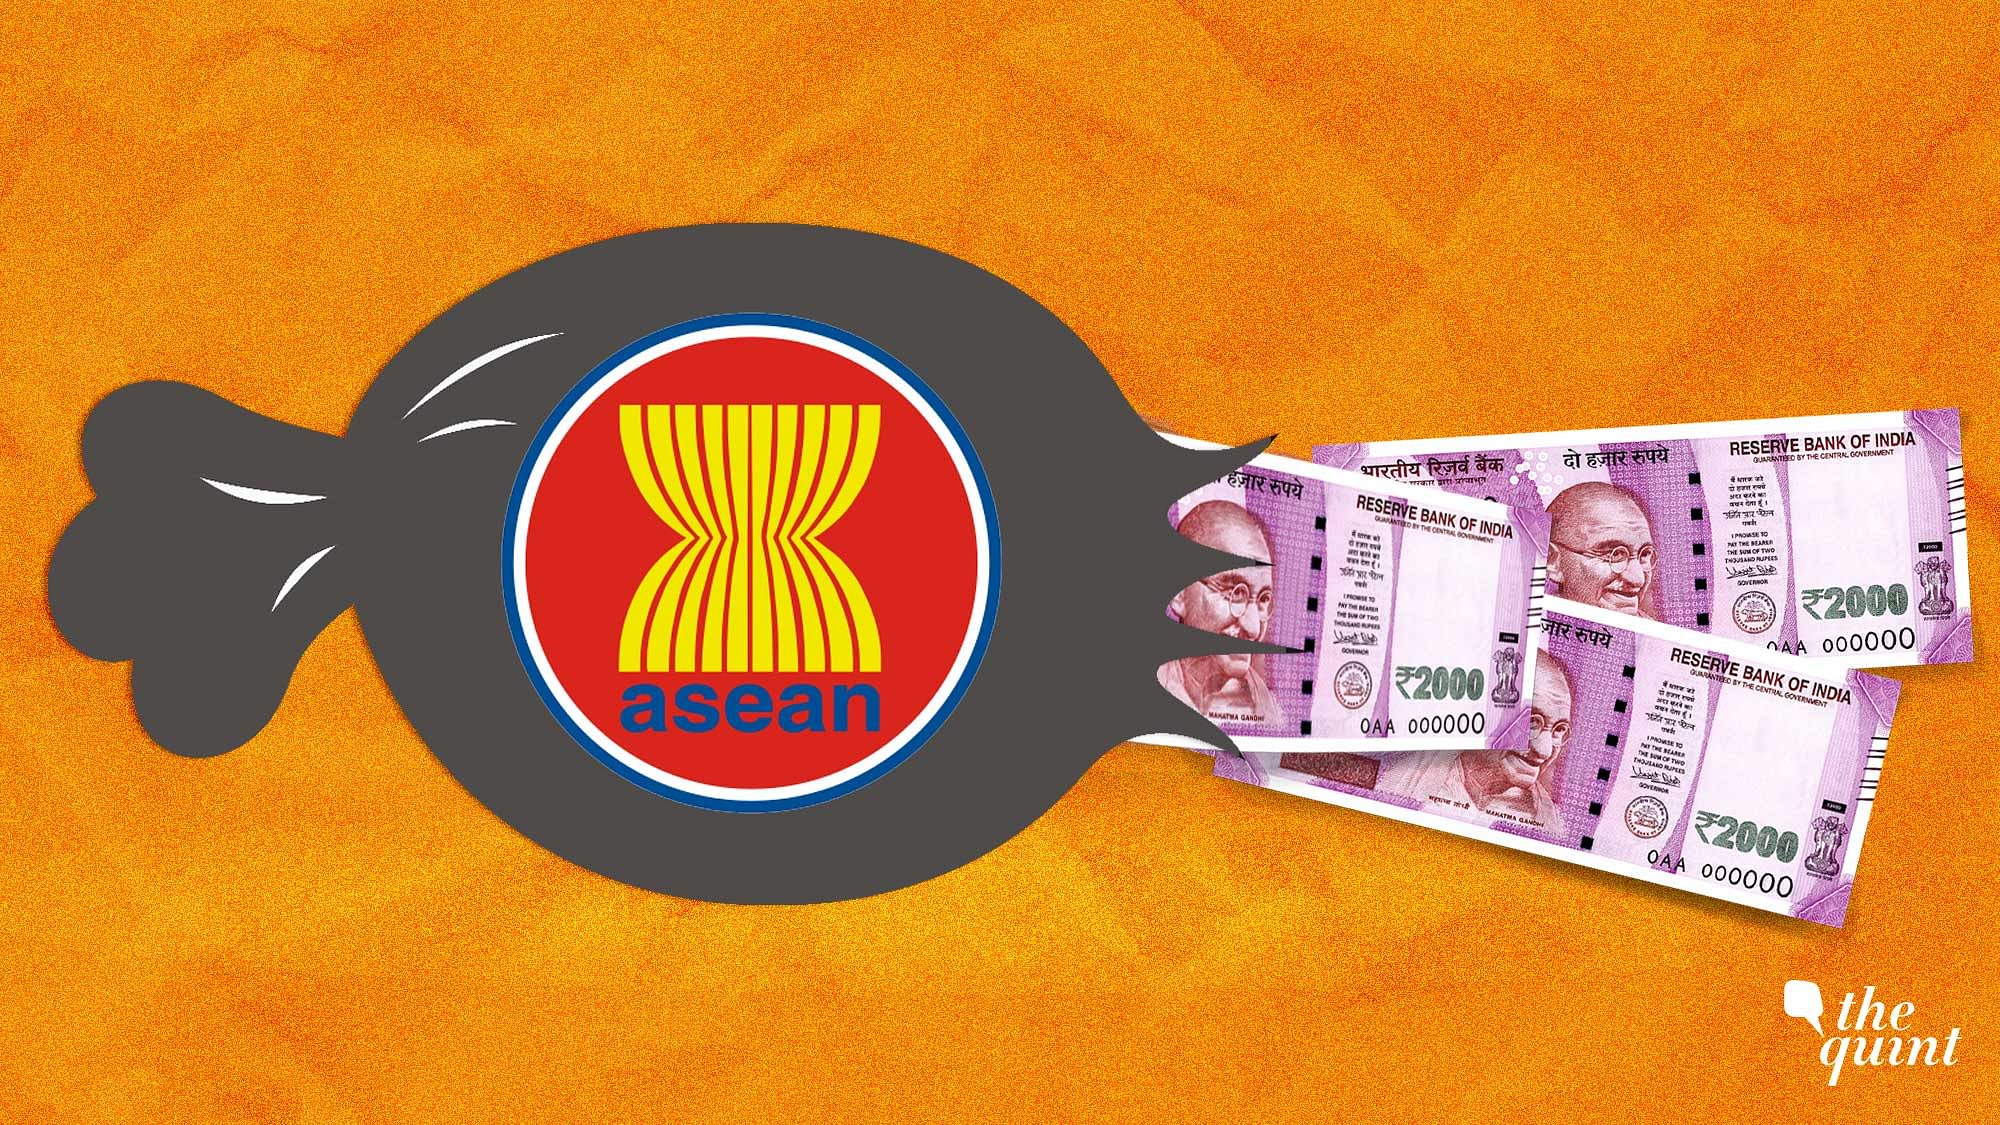 Cold response by ASEAN countries on PM Modi’s line of credit offer is a blow for the government’s ‘Act East’ policy.